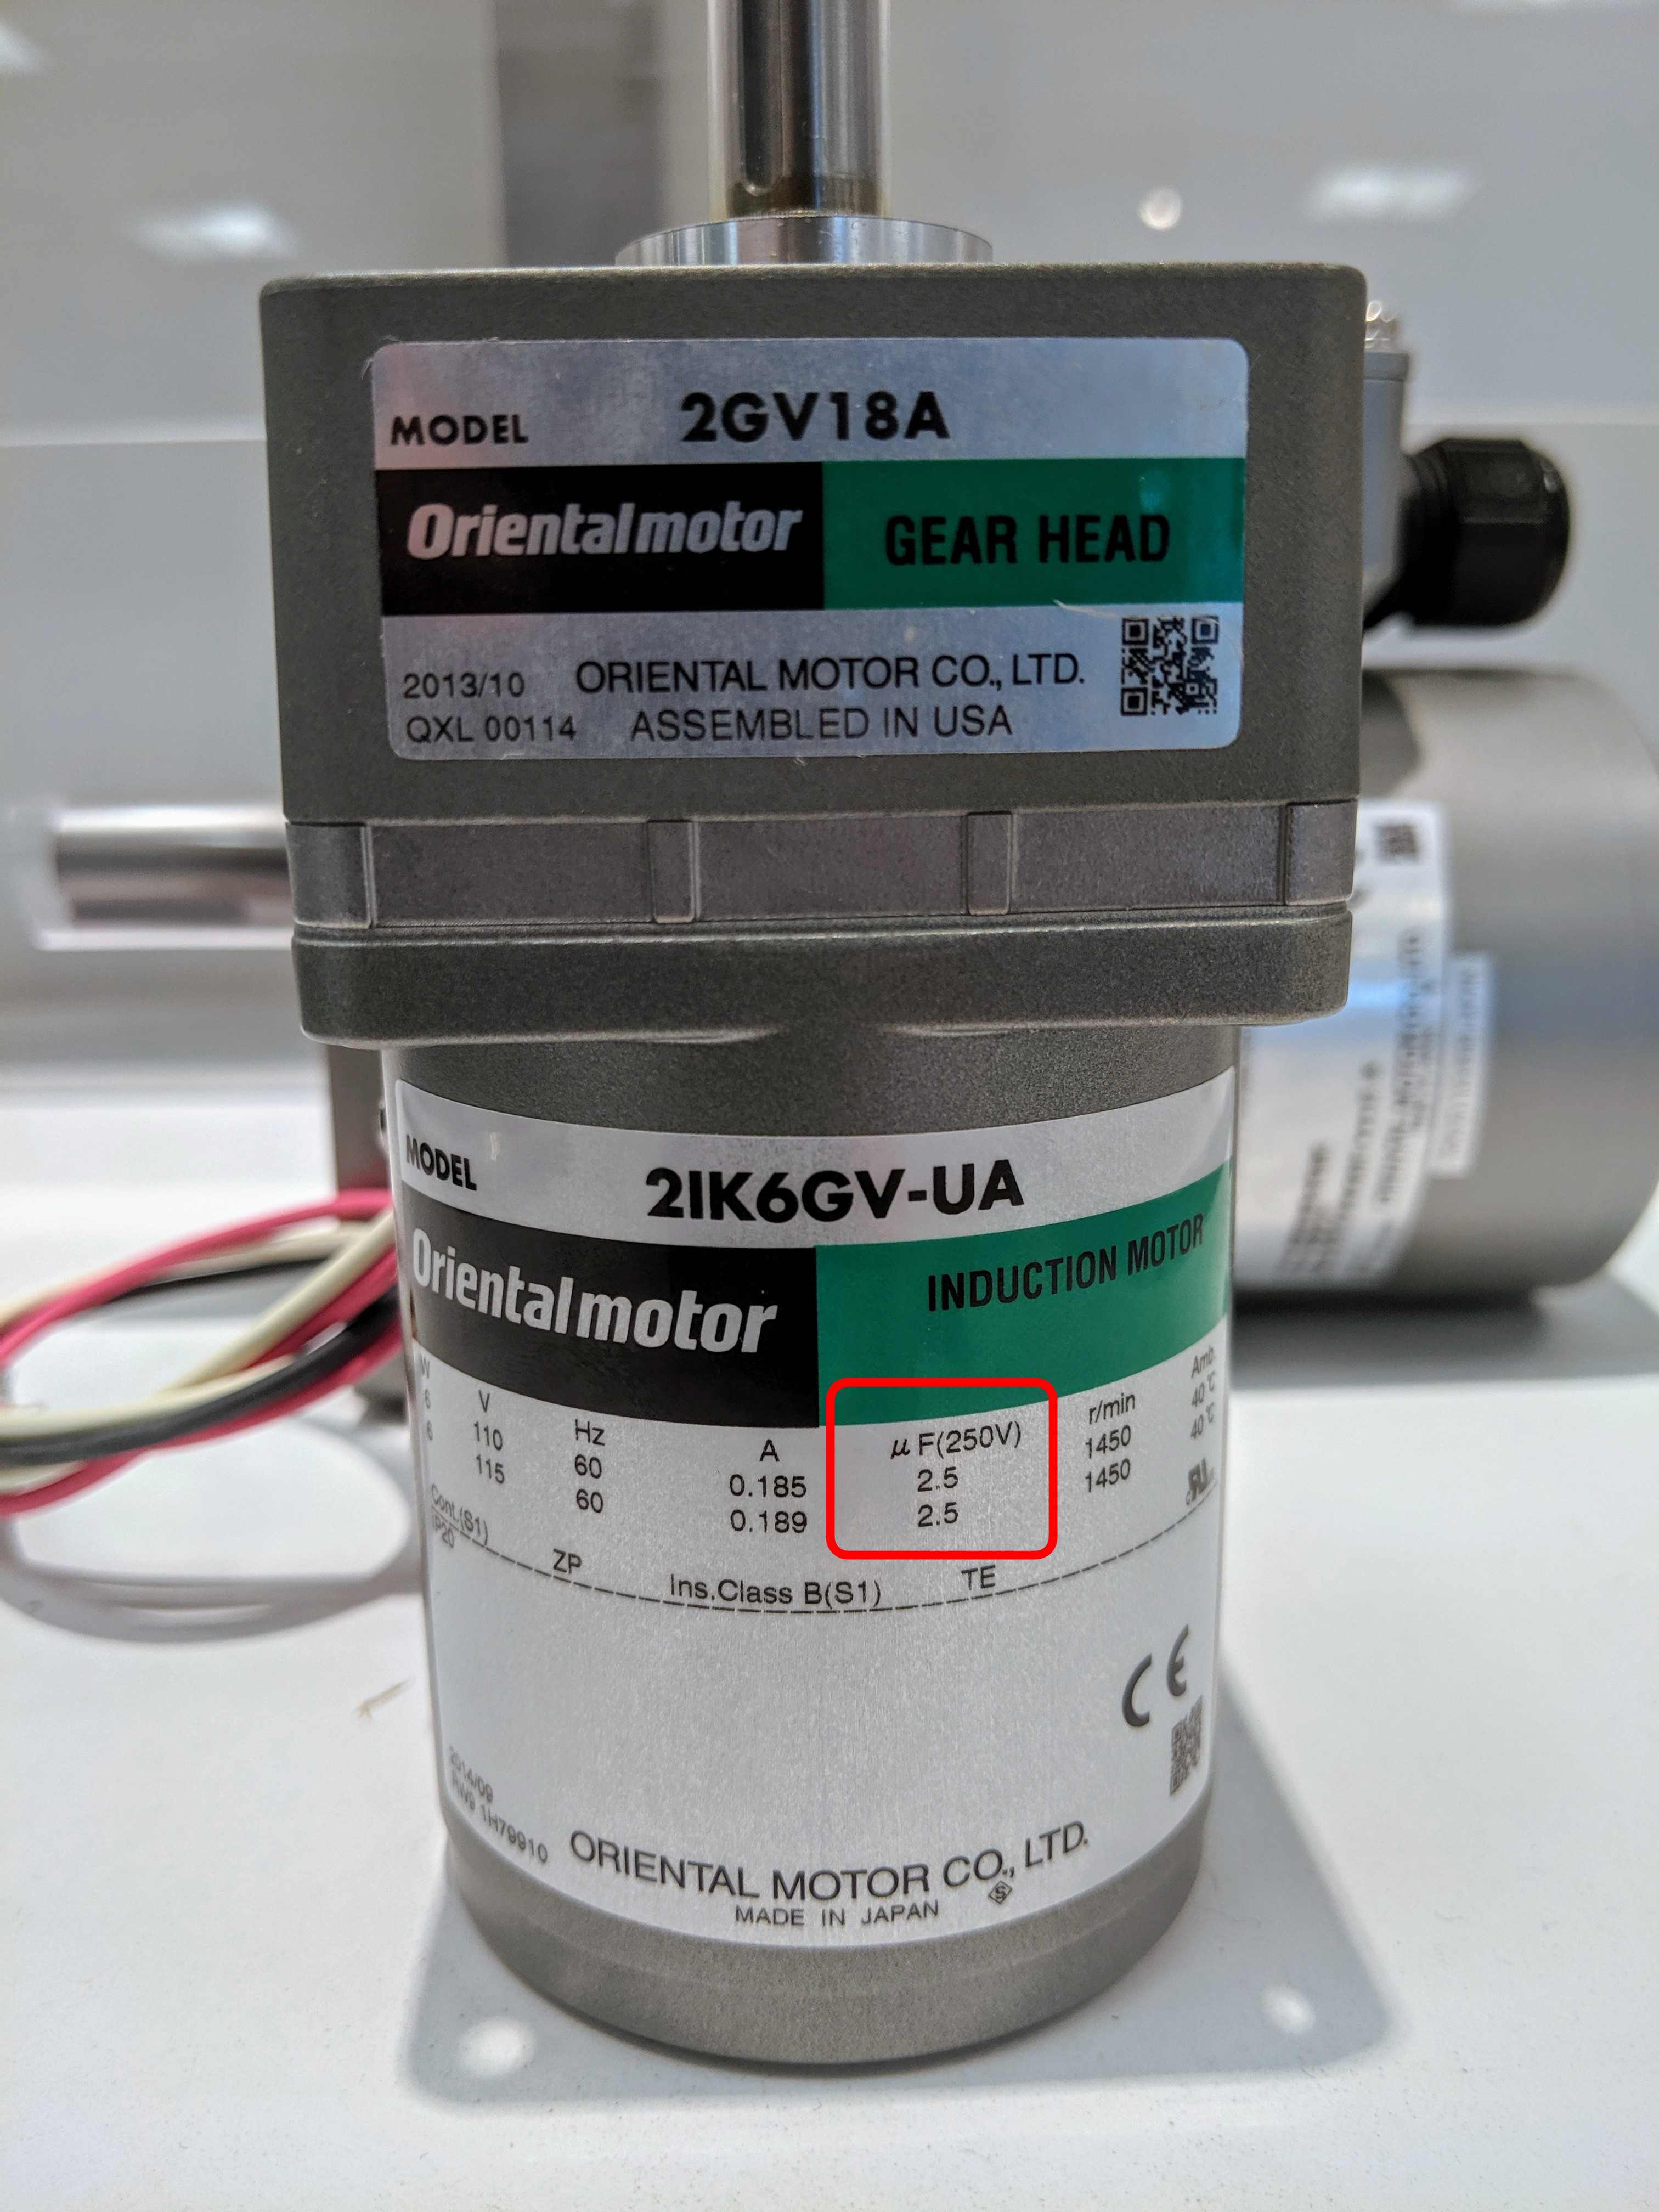 AC motor label with recommended capacitor